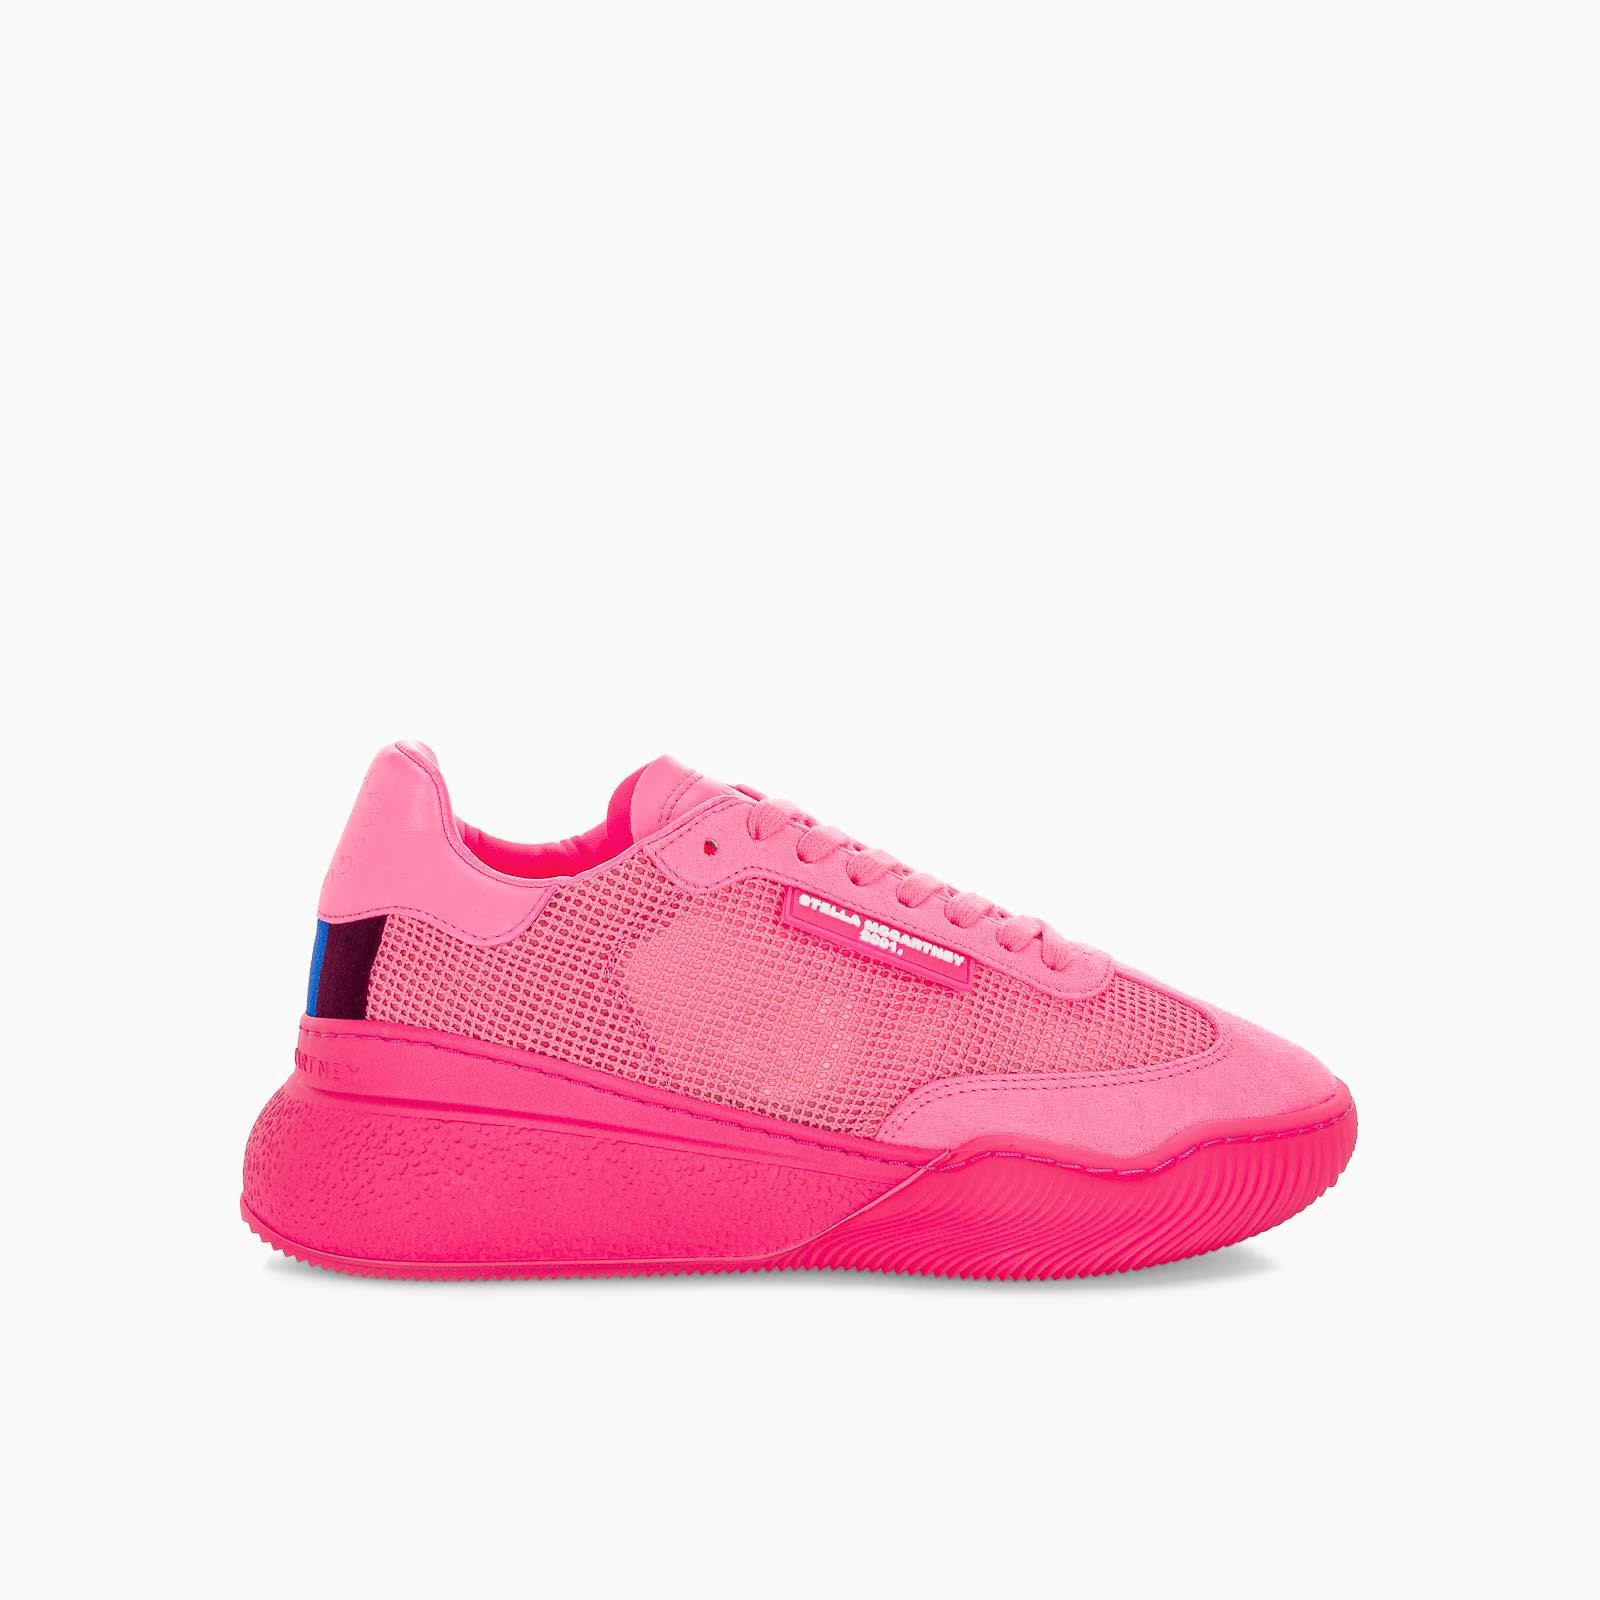 Buy Stella Mccartney Fluo Pink Loop Lace-up Sneakers online, shop Stella McCartney shoes with free shipping